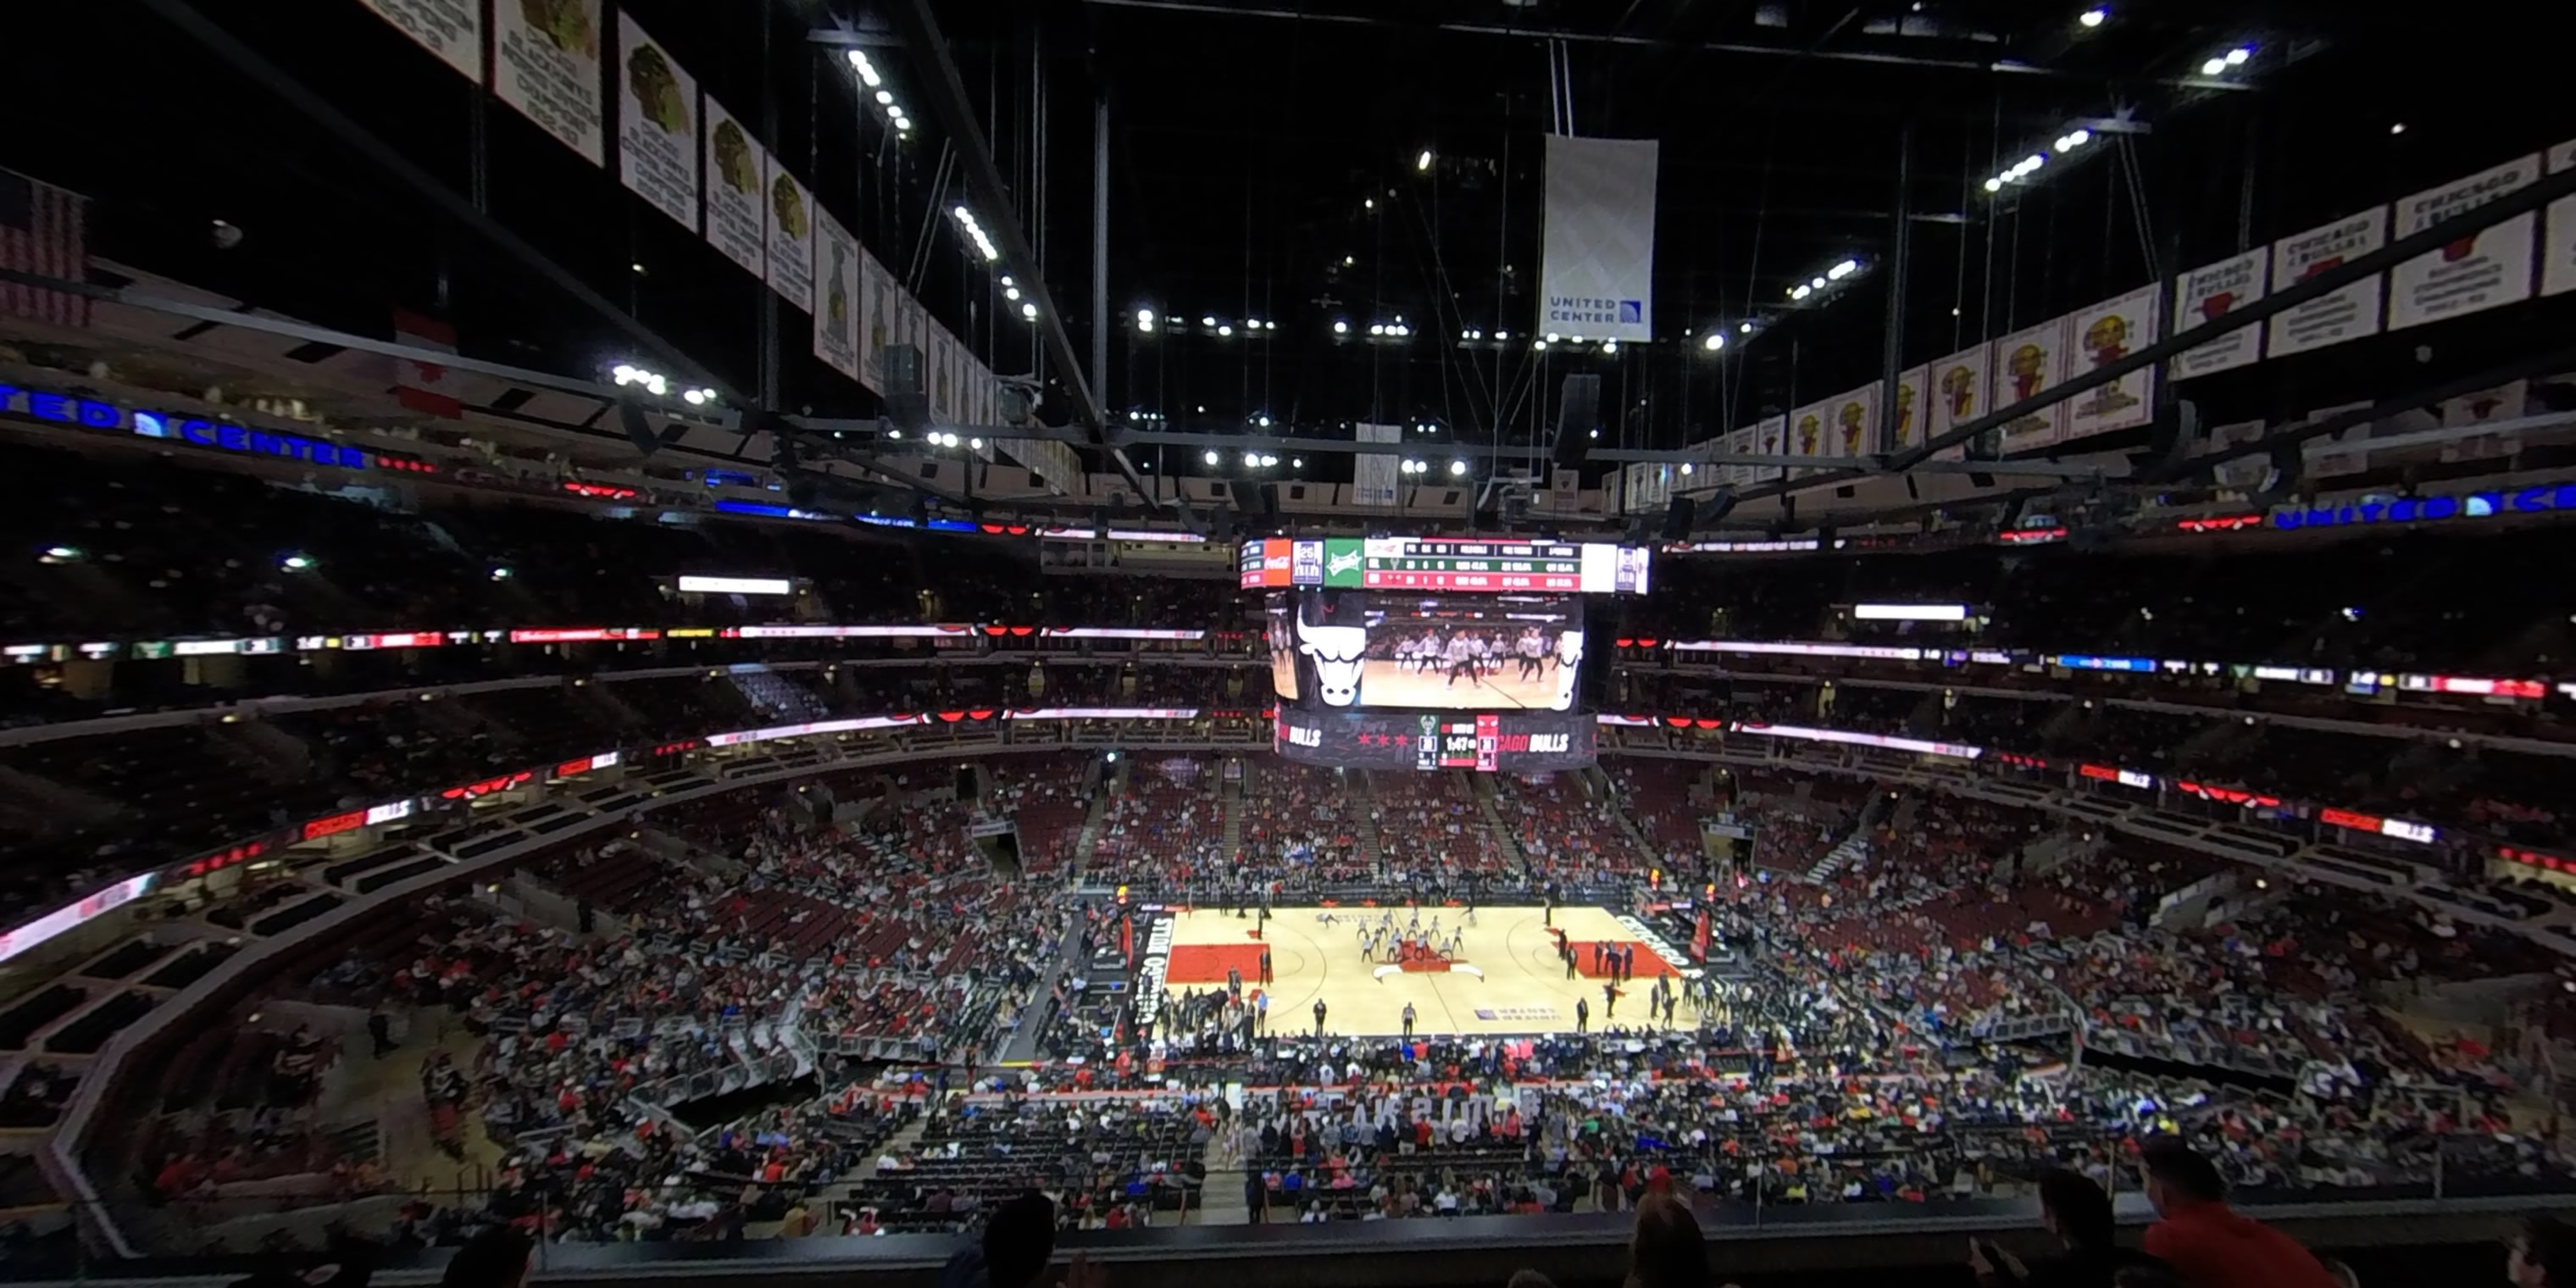 section 301 panoramic seat view  for basketball - united center